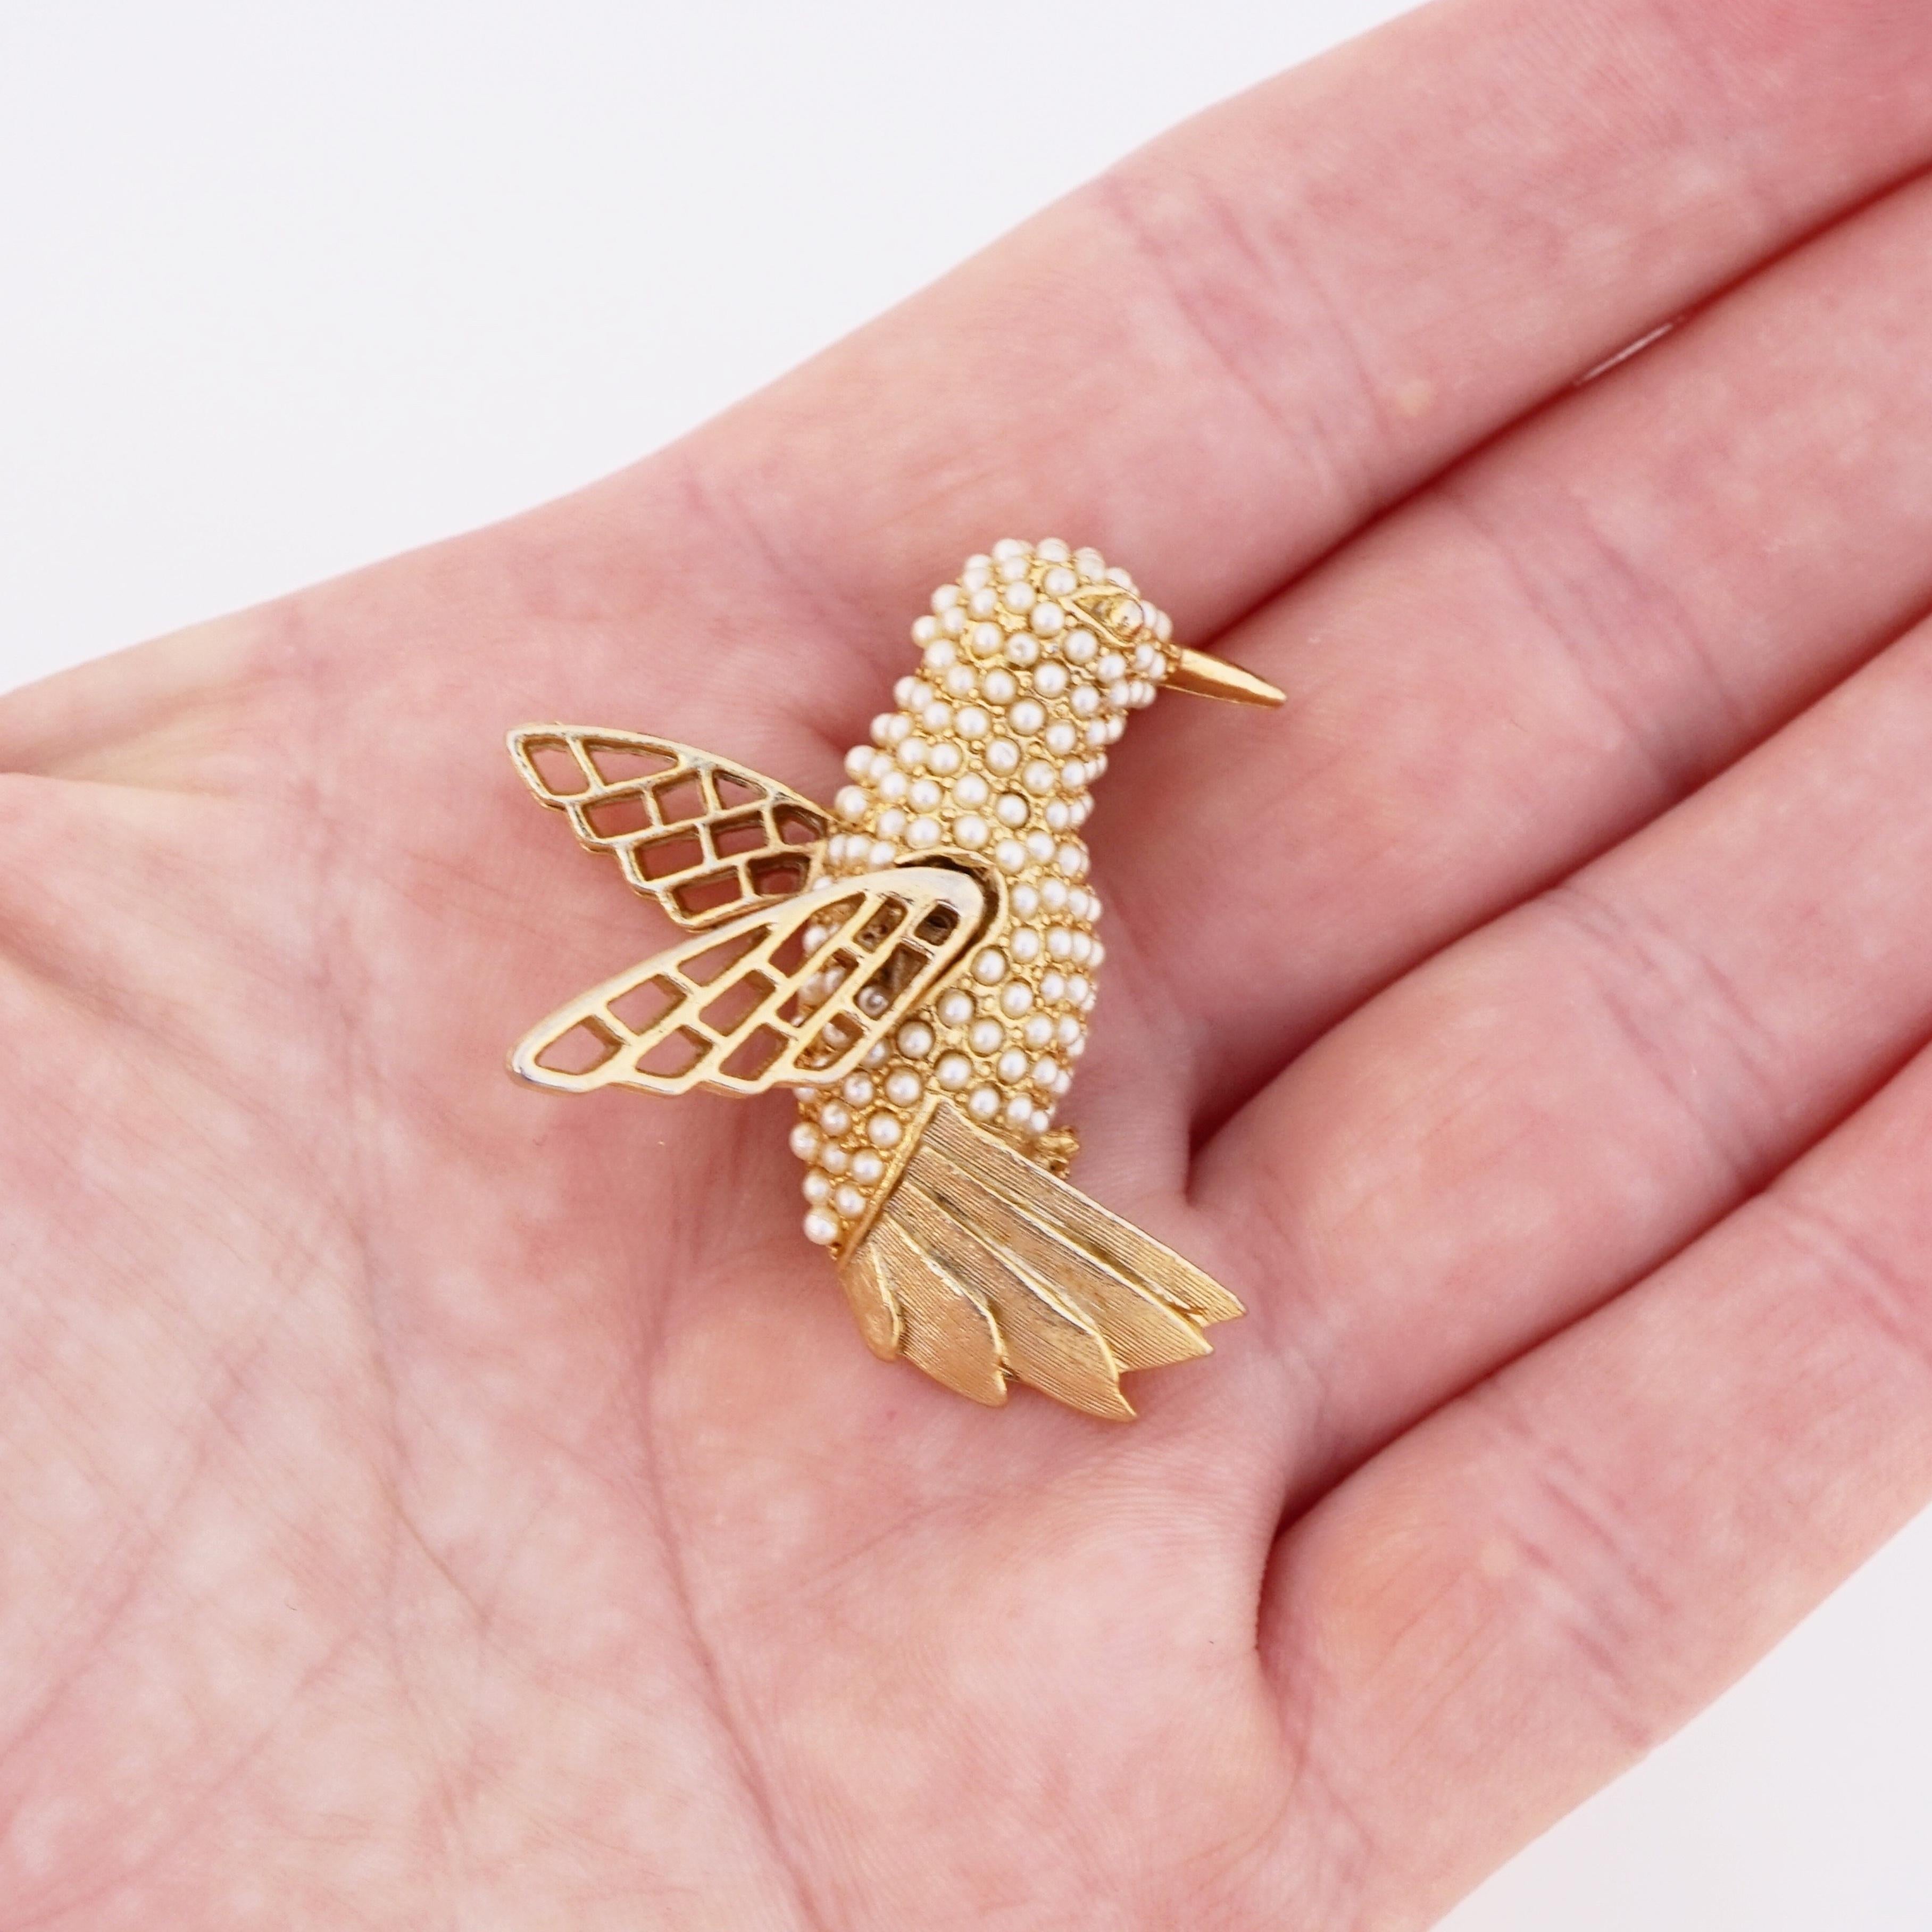 Women's Gold Flying Hummingbird Figural Brooch With Seed Pearl Pavé By Hargo, 1950s